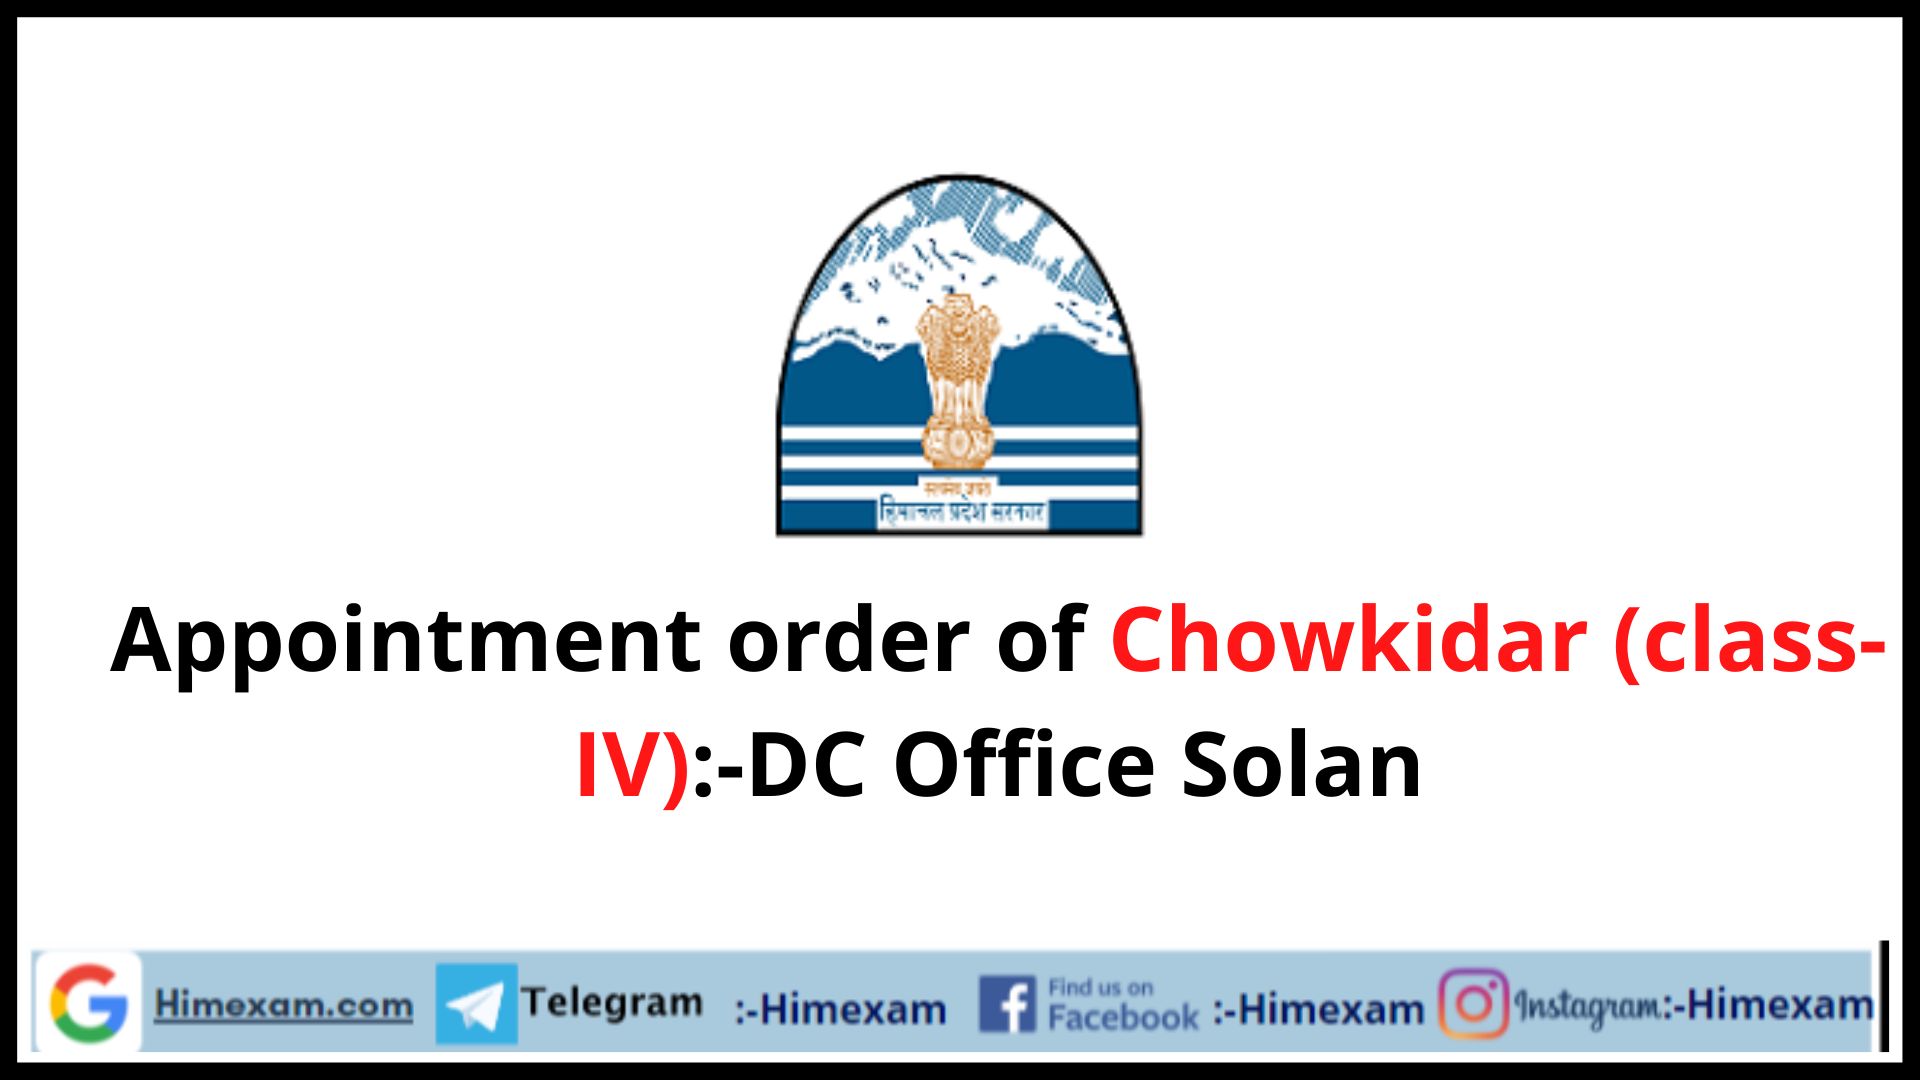 Appointment order of Chowkidar (class-IV):-DC Office Solan